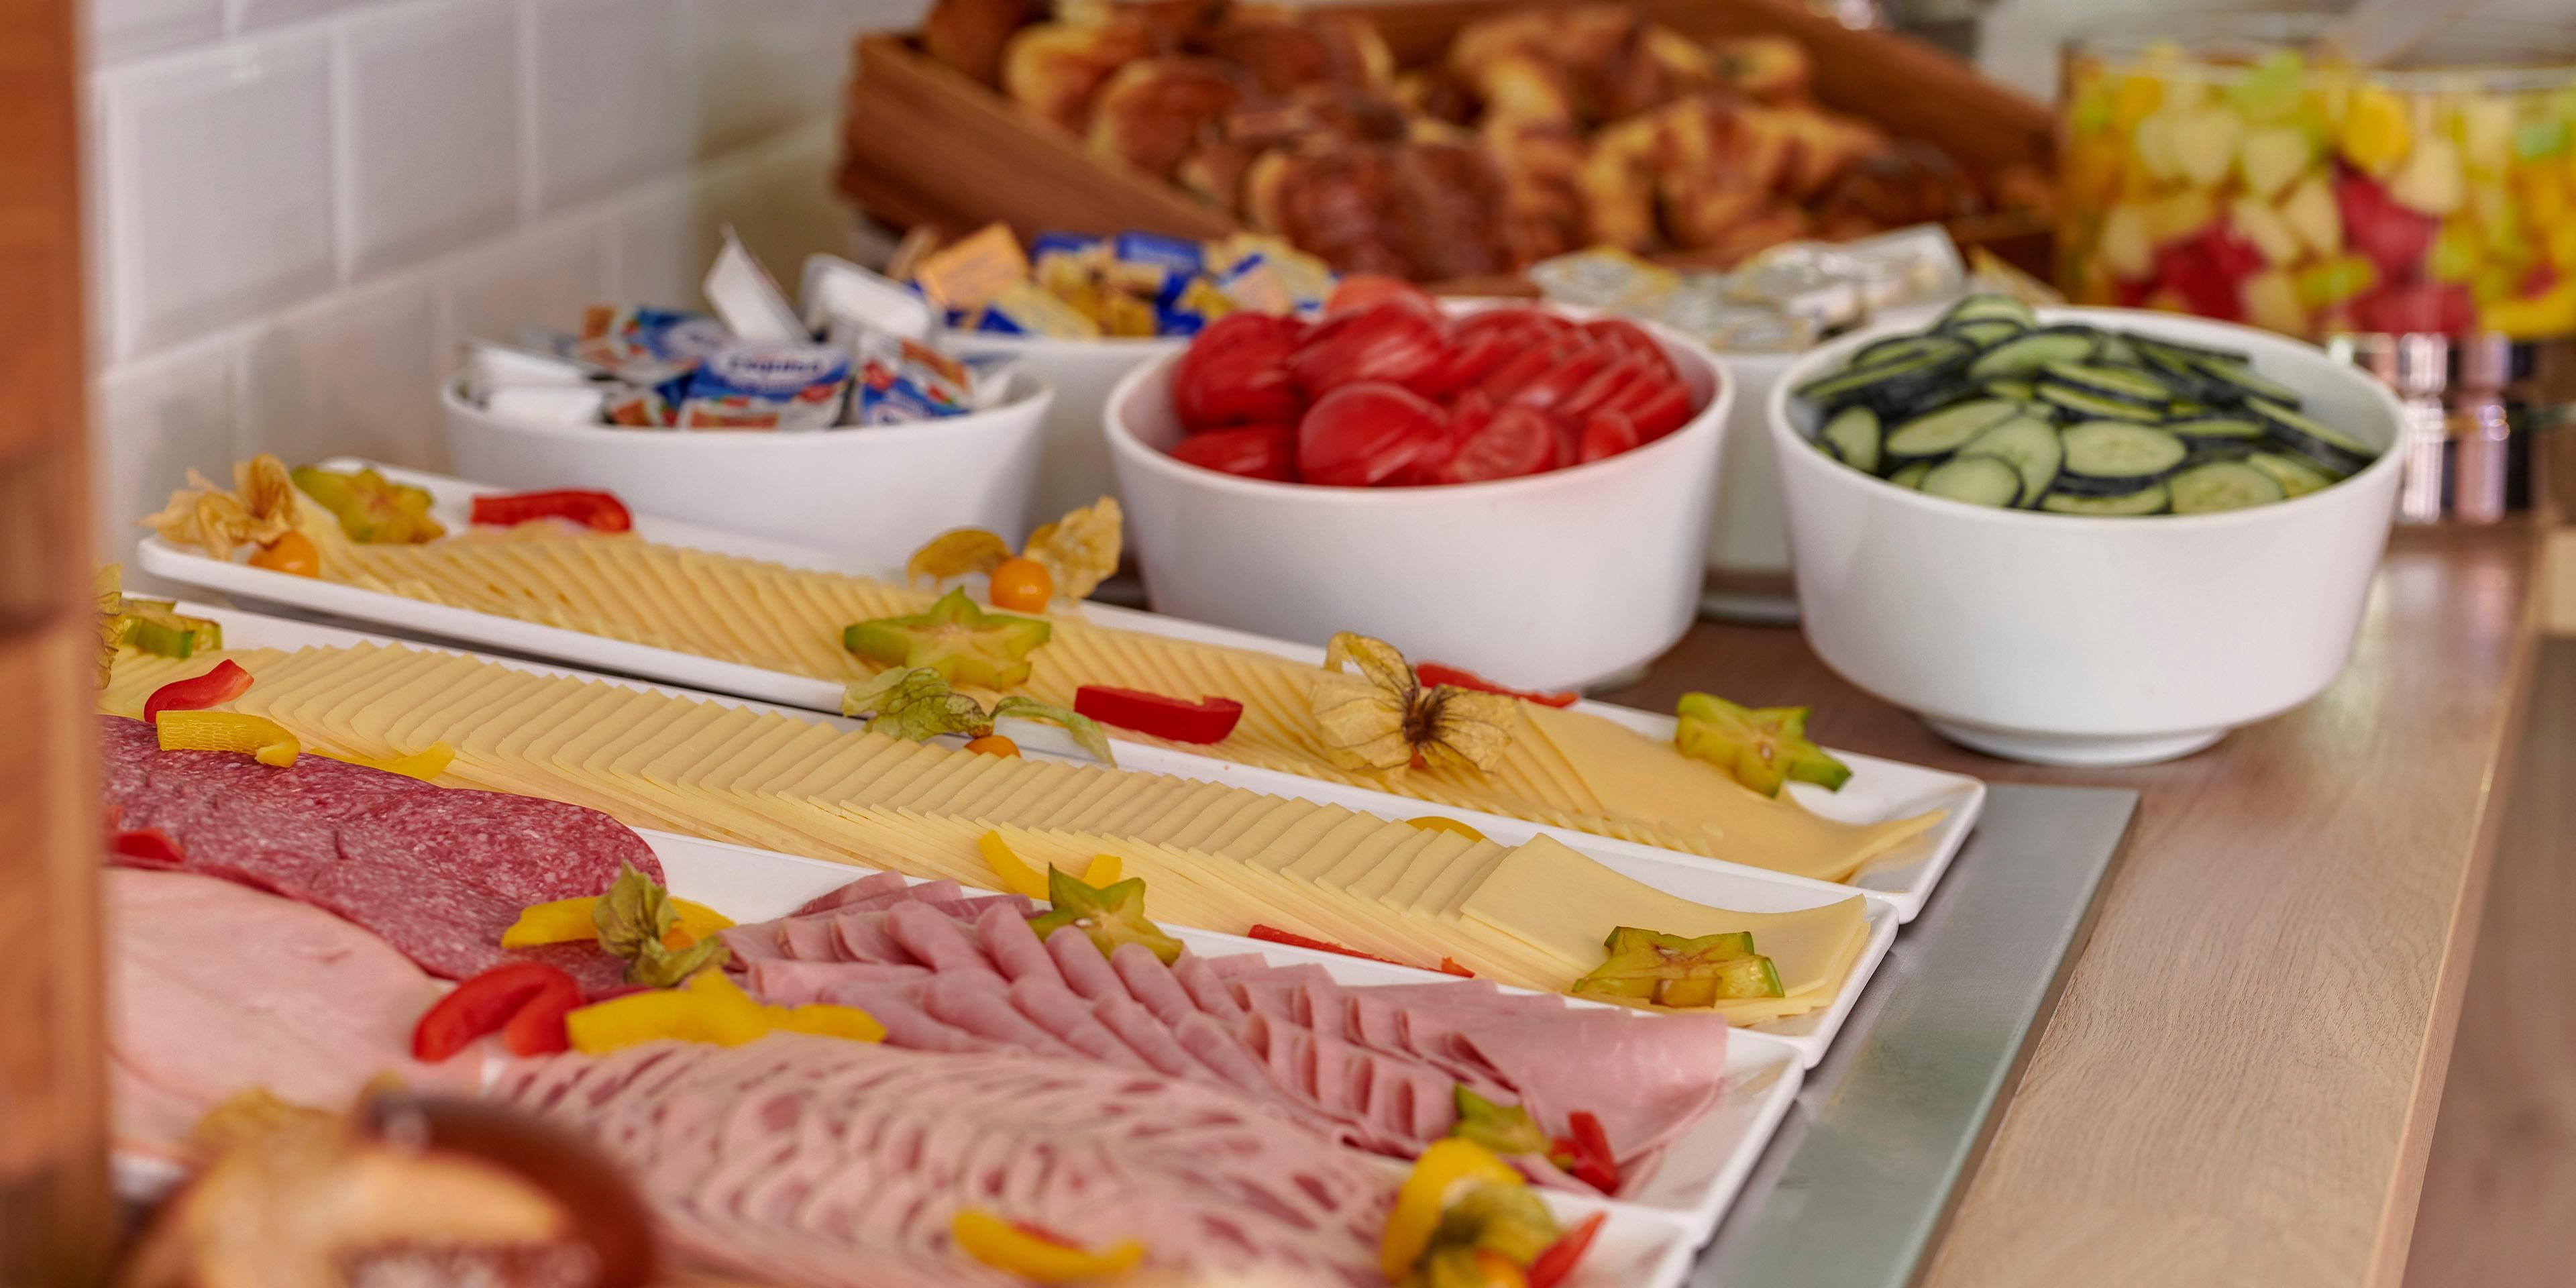 Fuel up for the day with the included continental Express Start™ Breakfast buffet in the Great Room. The spread includes pastries, cold cuts, hard-boiled eggs and more.